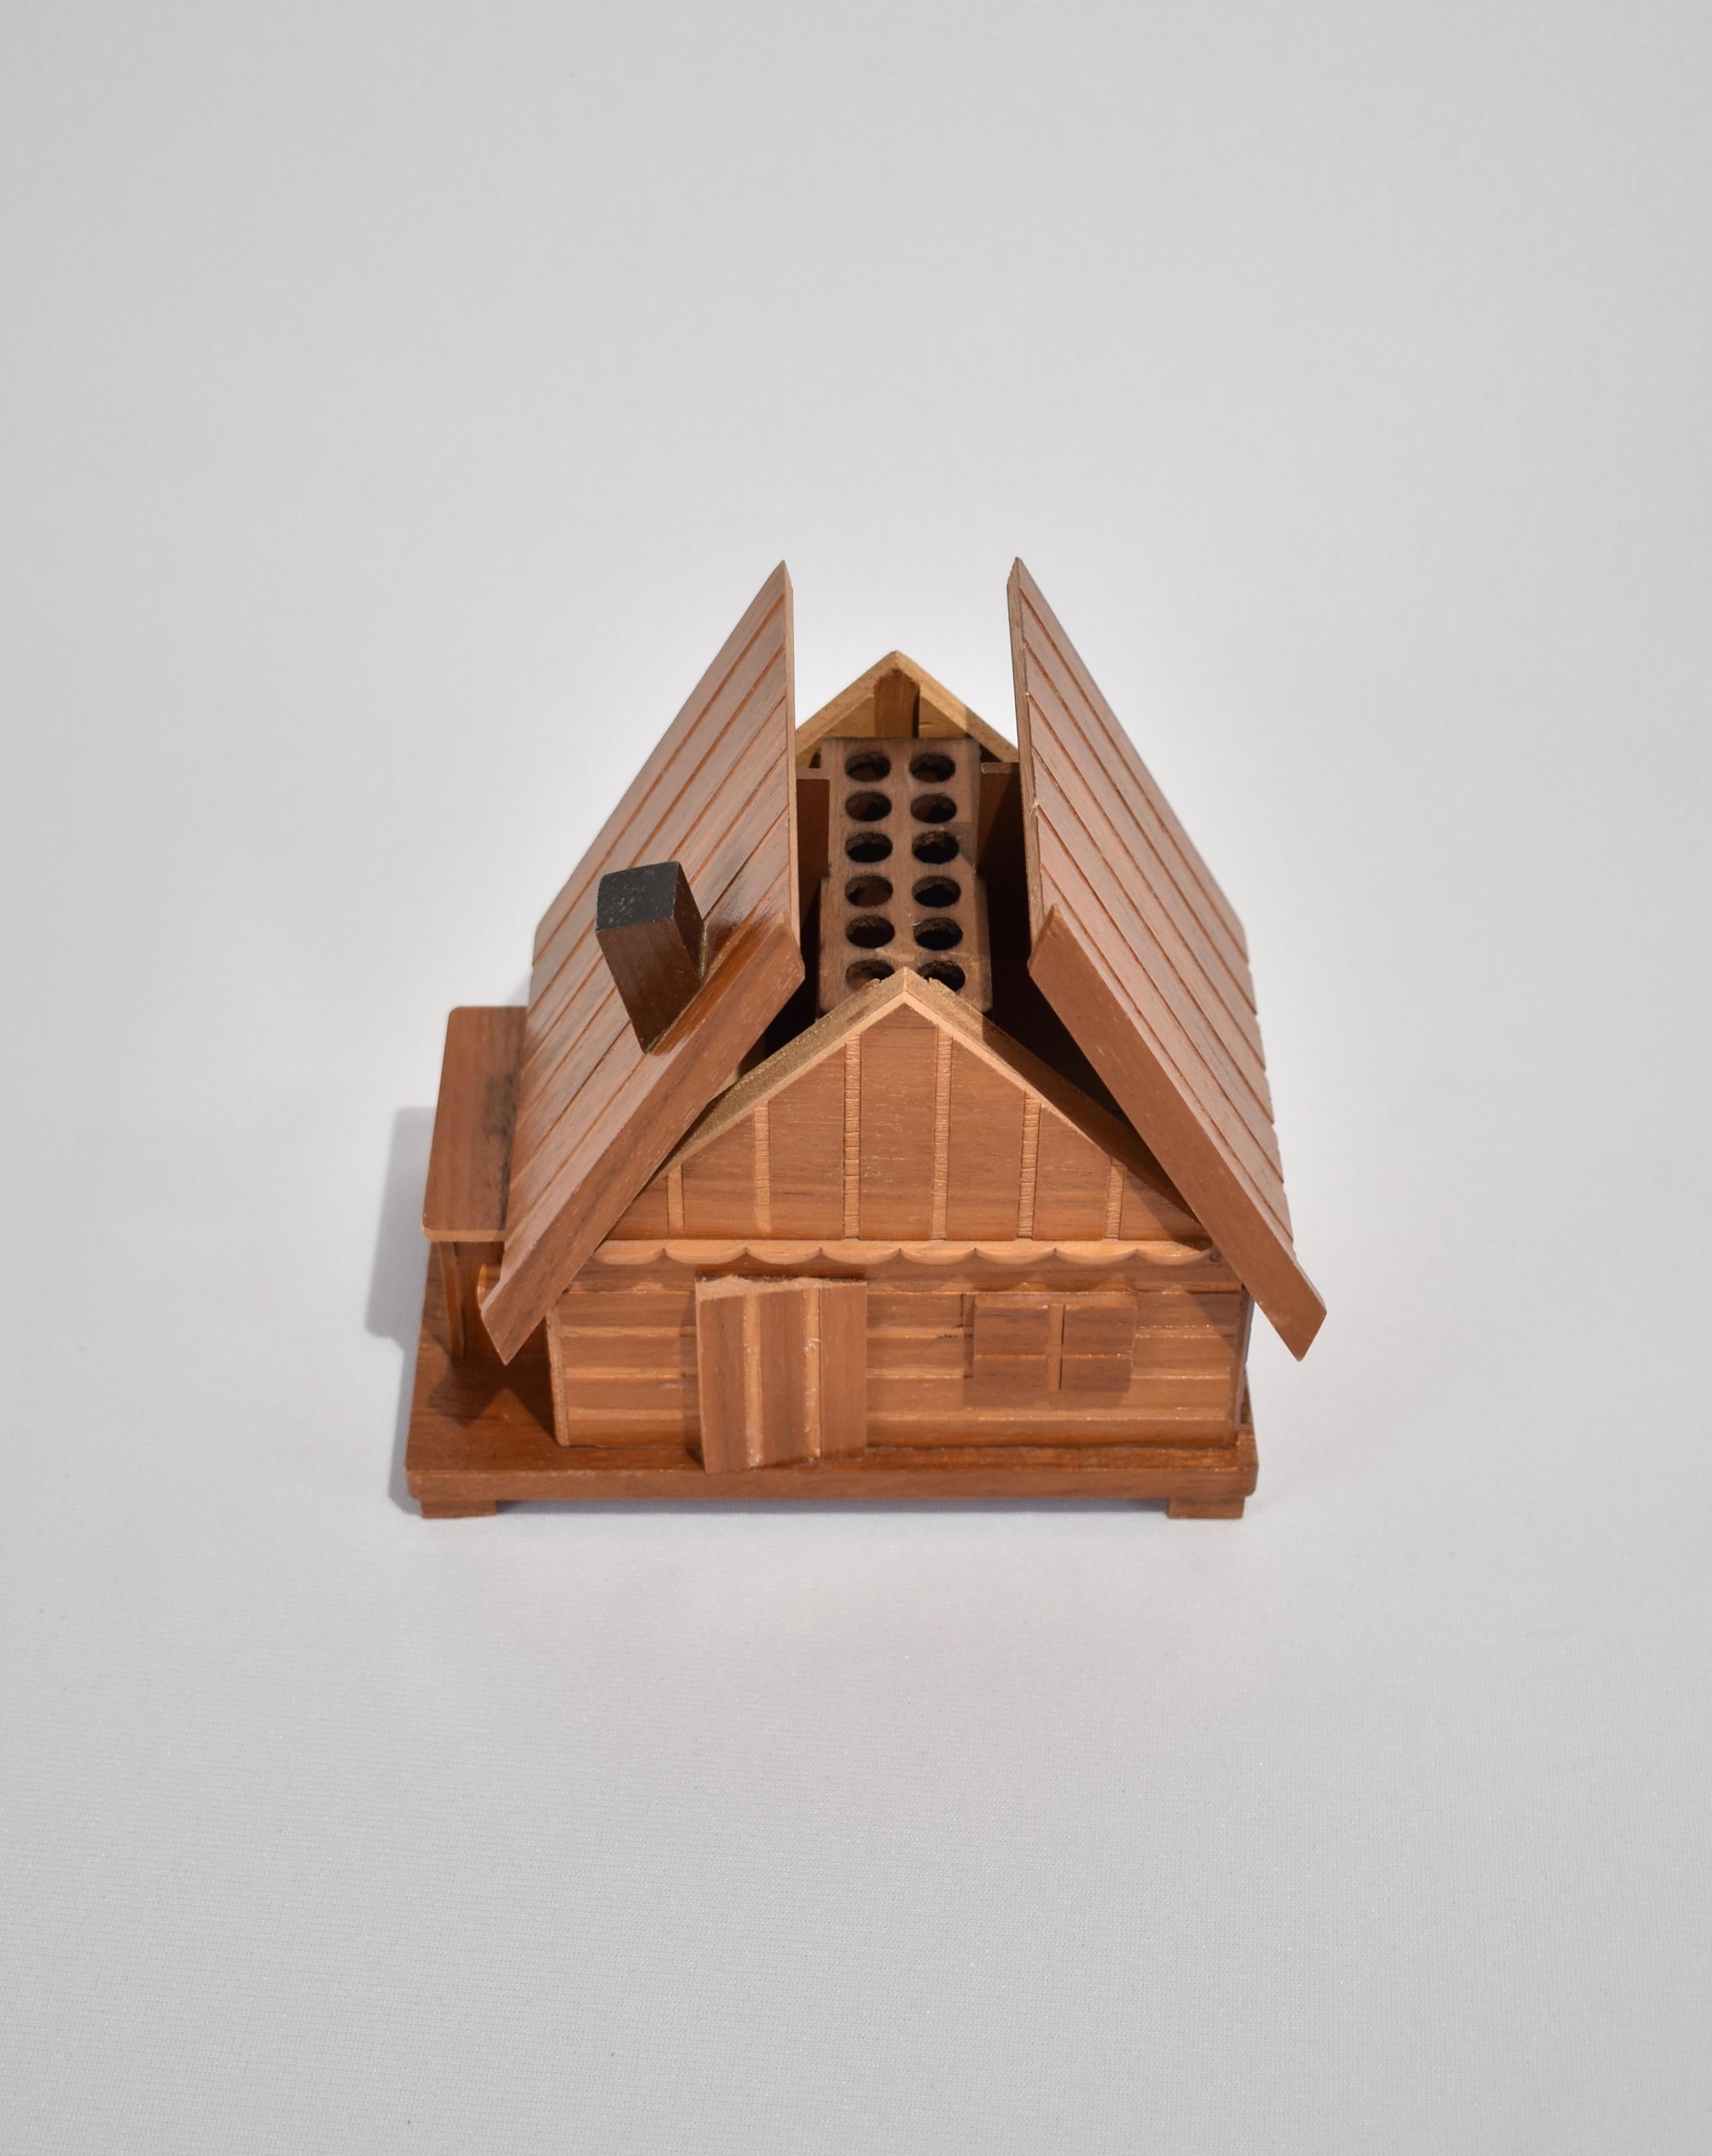 Vintage, wooden music box cigarette holder in a whimsical house design. Box is hand wound and includes a release button on the side of the house. When pressed, an instrumental version of Smoke Gets in Your Eyes plays as it opens to reveal twelve